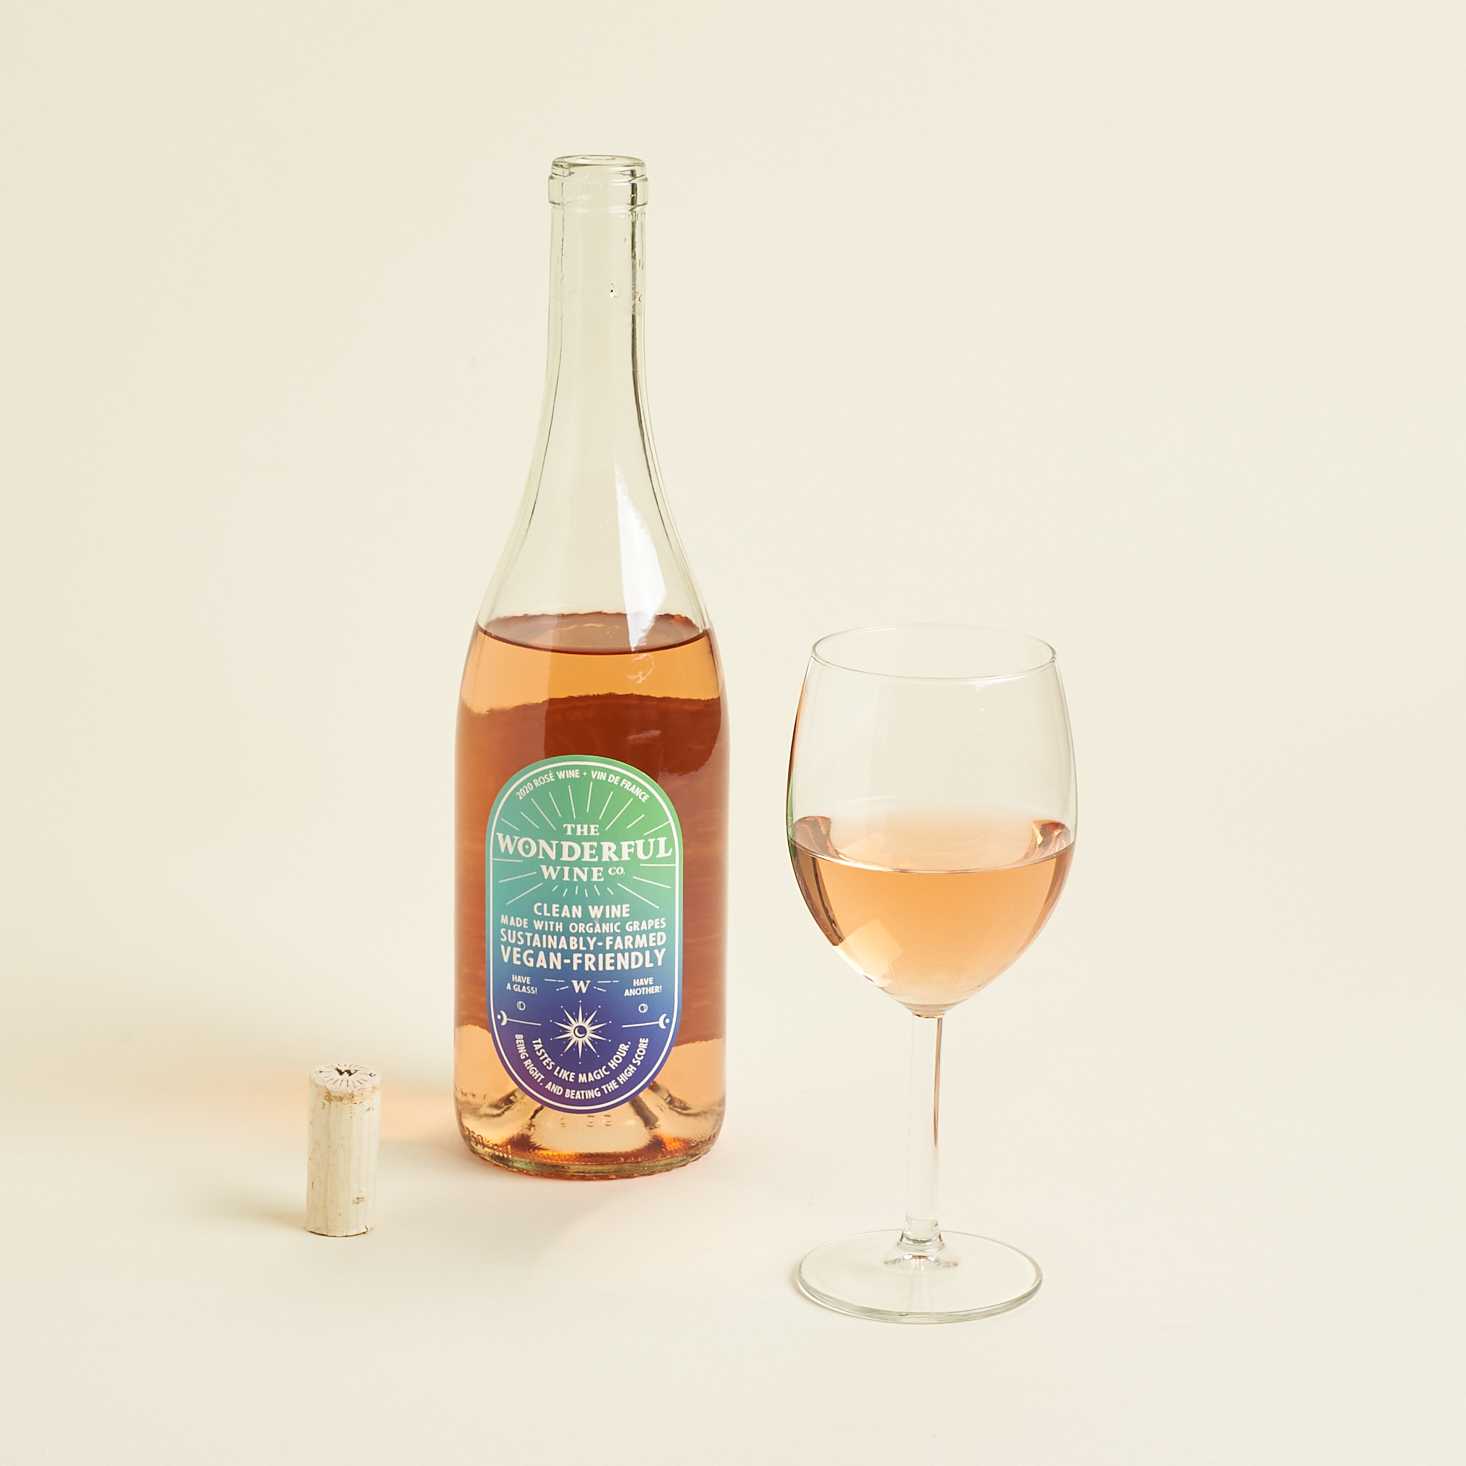 filled glass of wine beside open bottle and cork